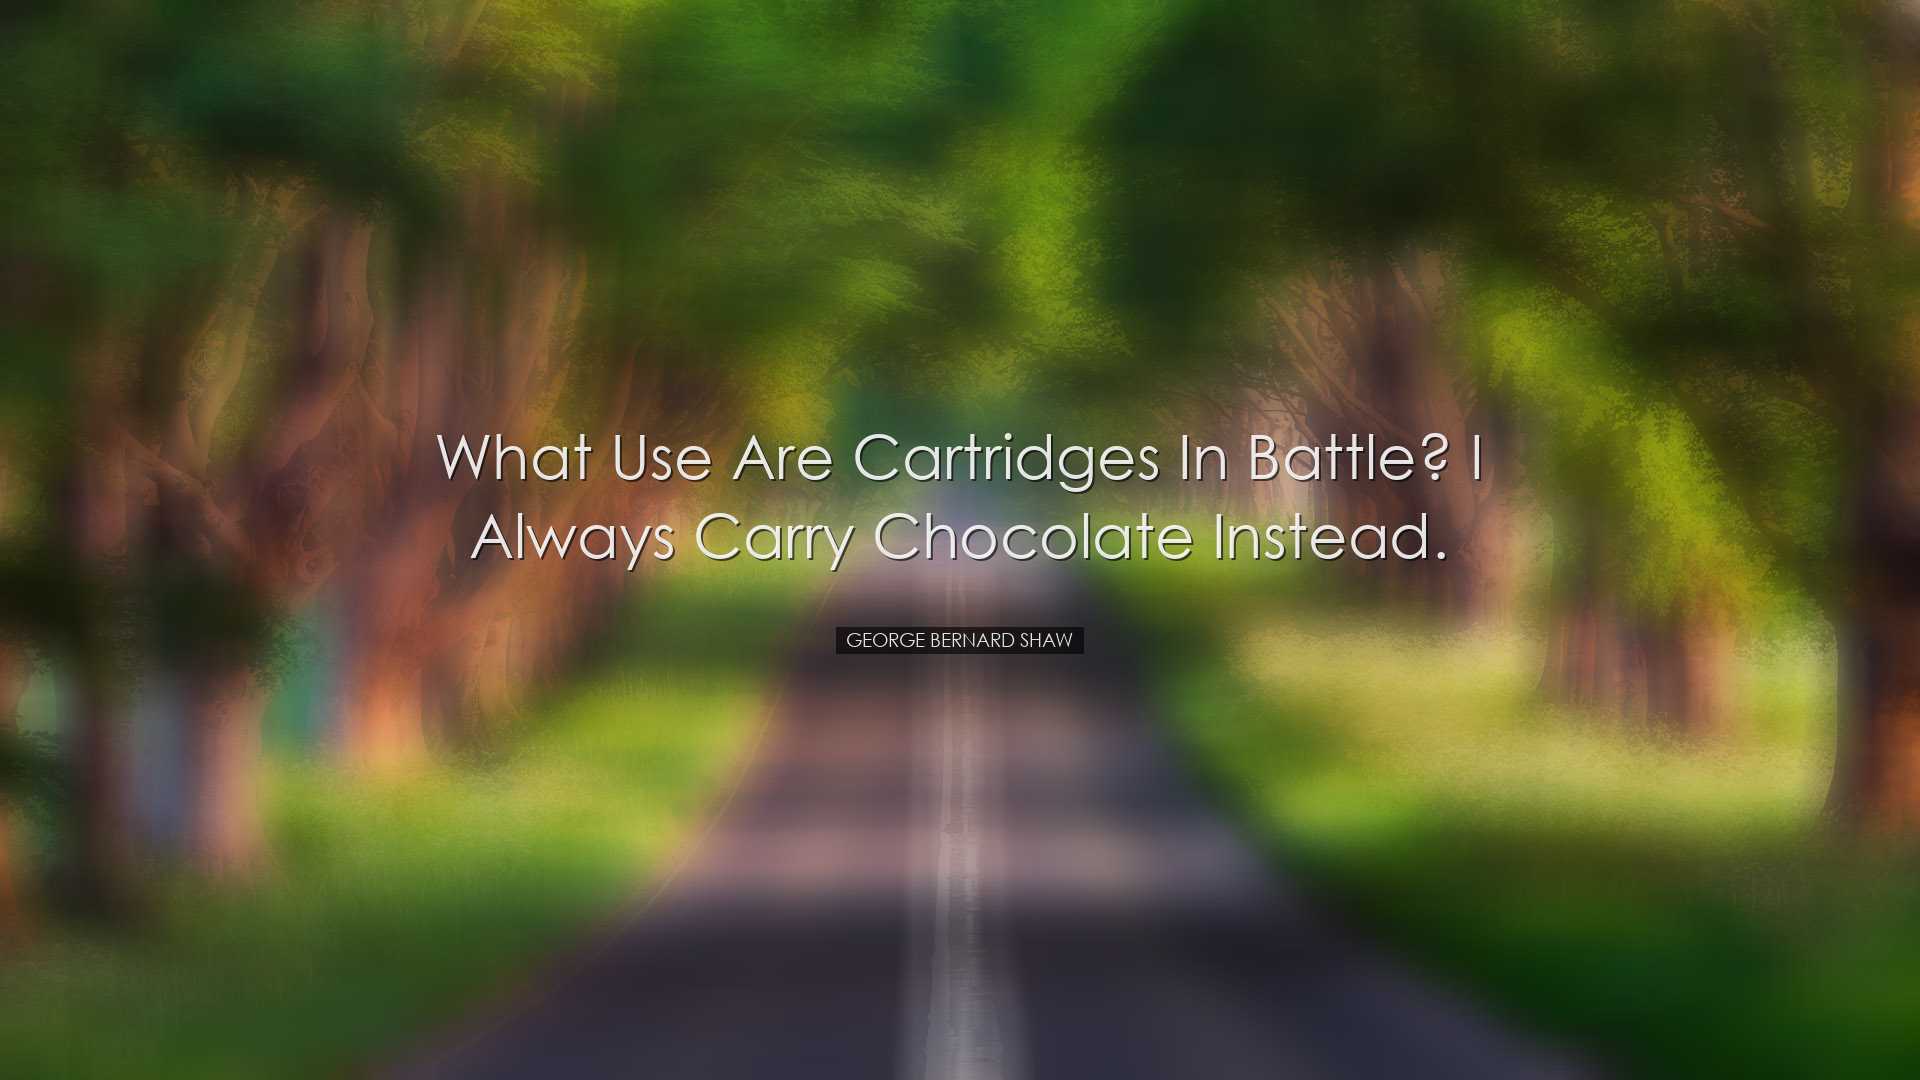 What use are cartridges in battle? I always carry chocolate instea